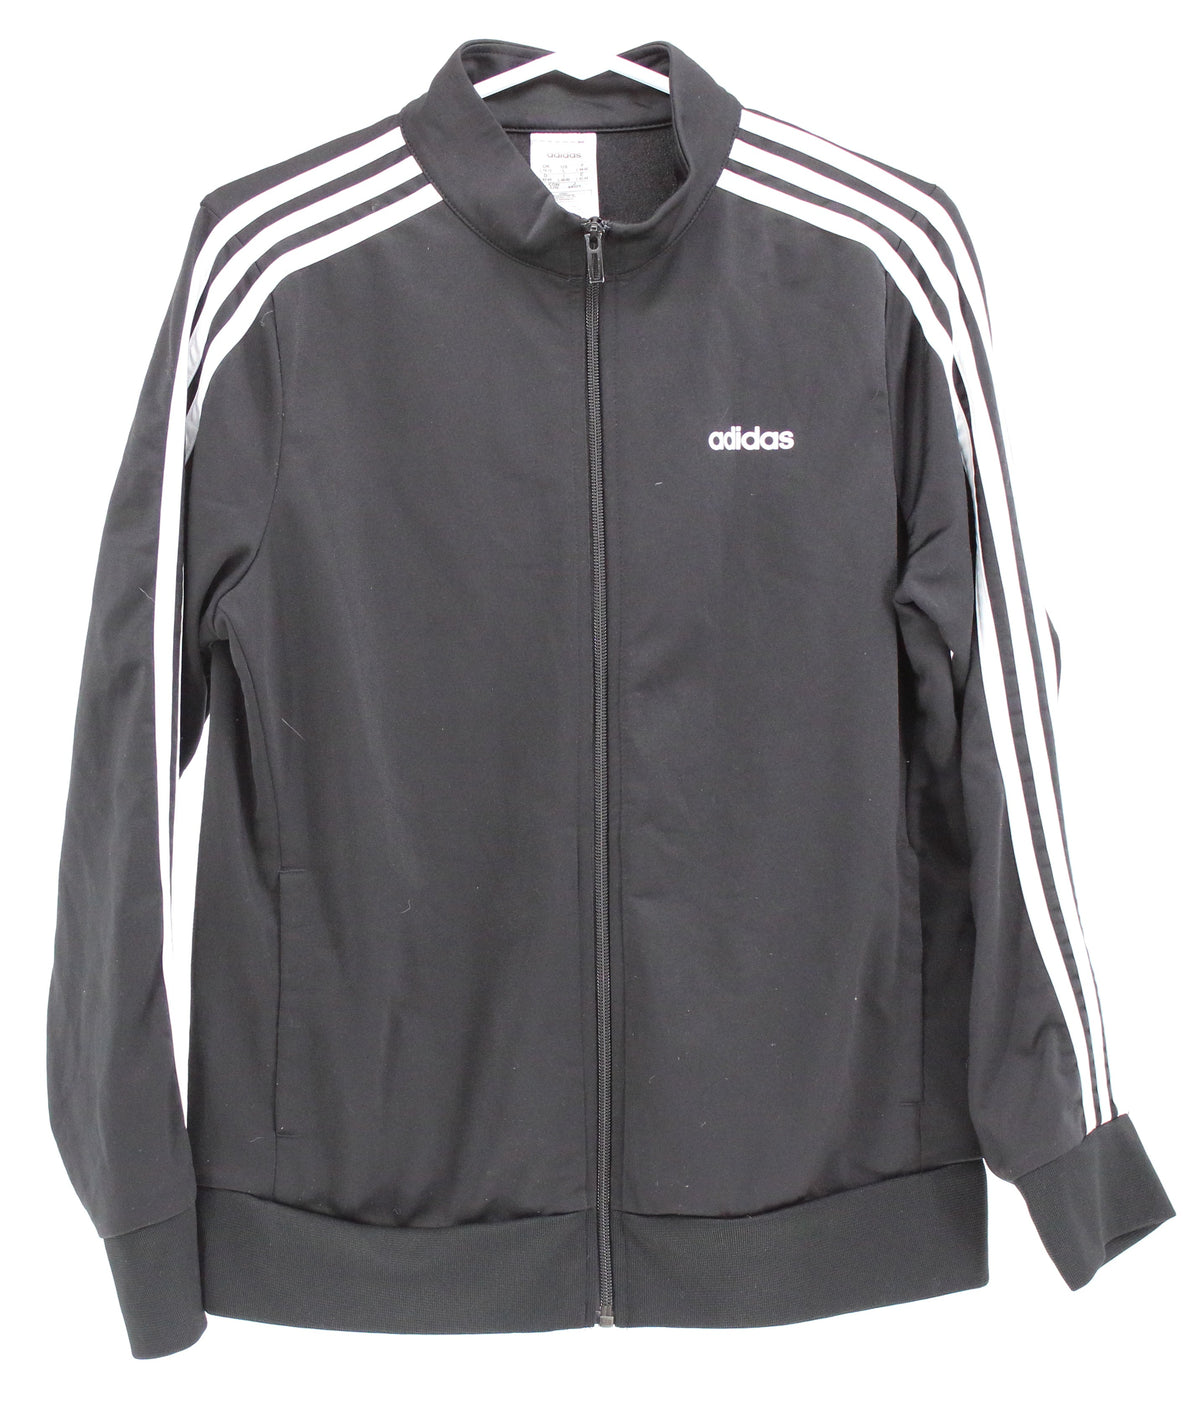 Adidas Black Women's Jacket With Striped Sleeves